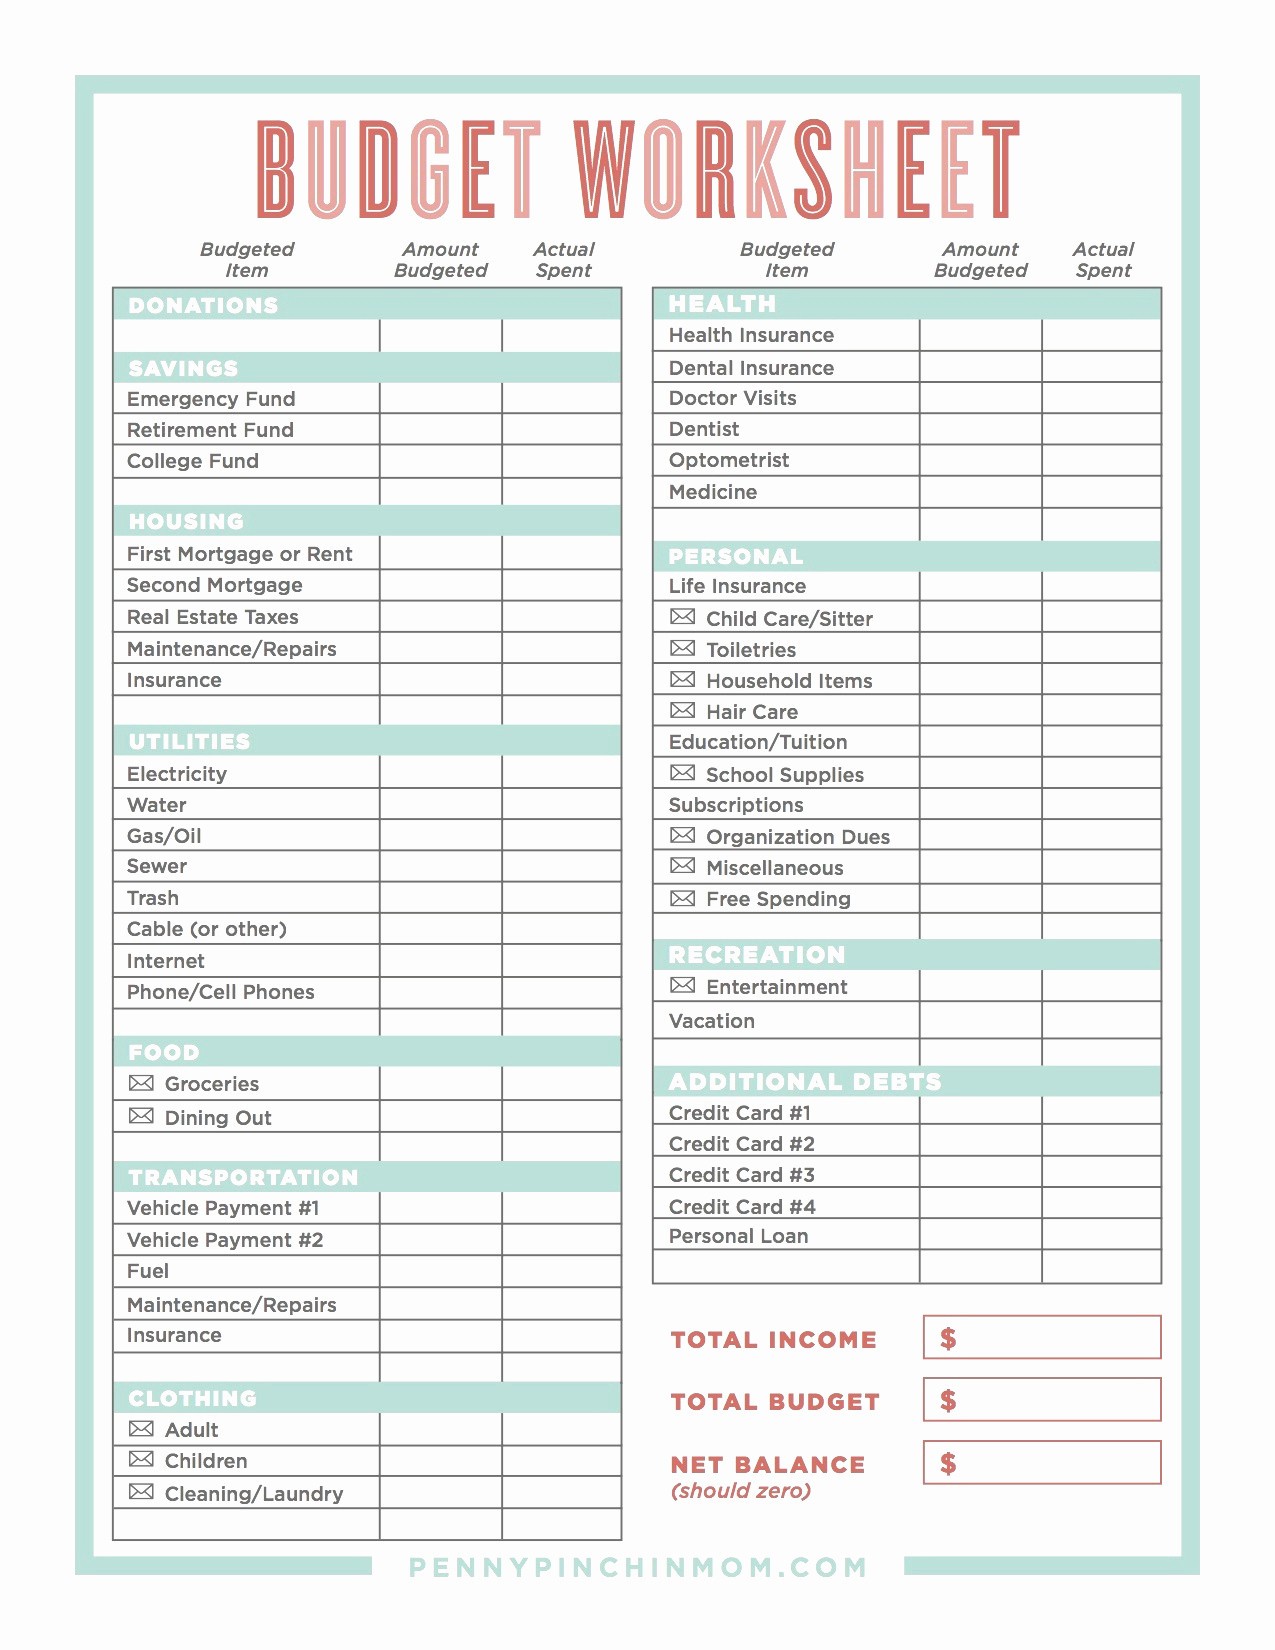 Printable Budget Worksheet Dave Ramsey Lovely How To Make A Good Bud